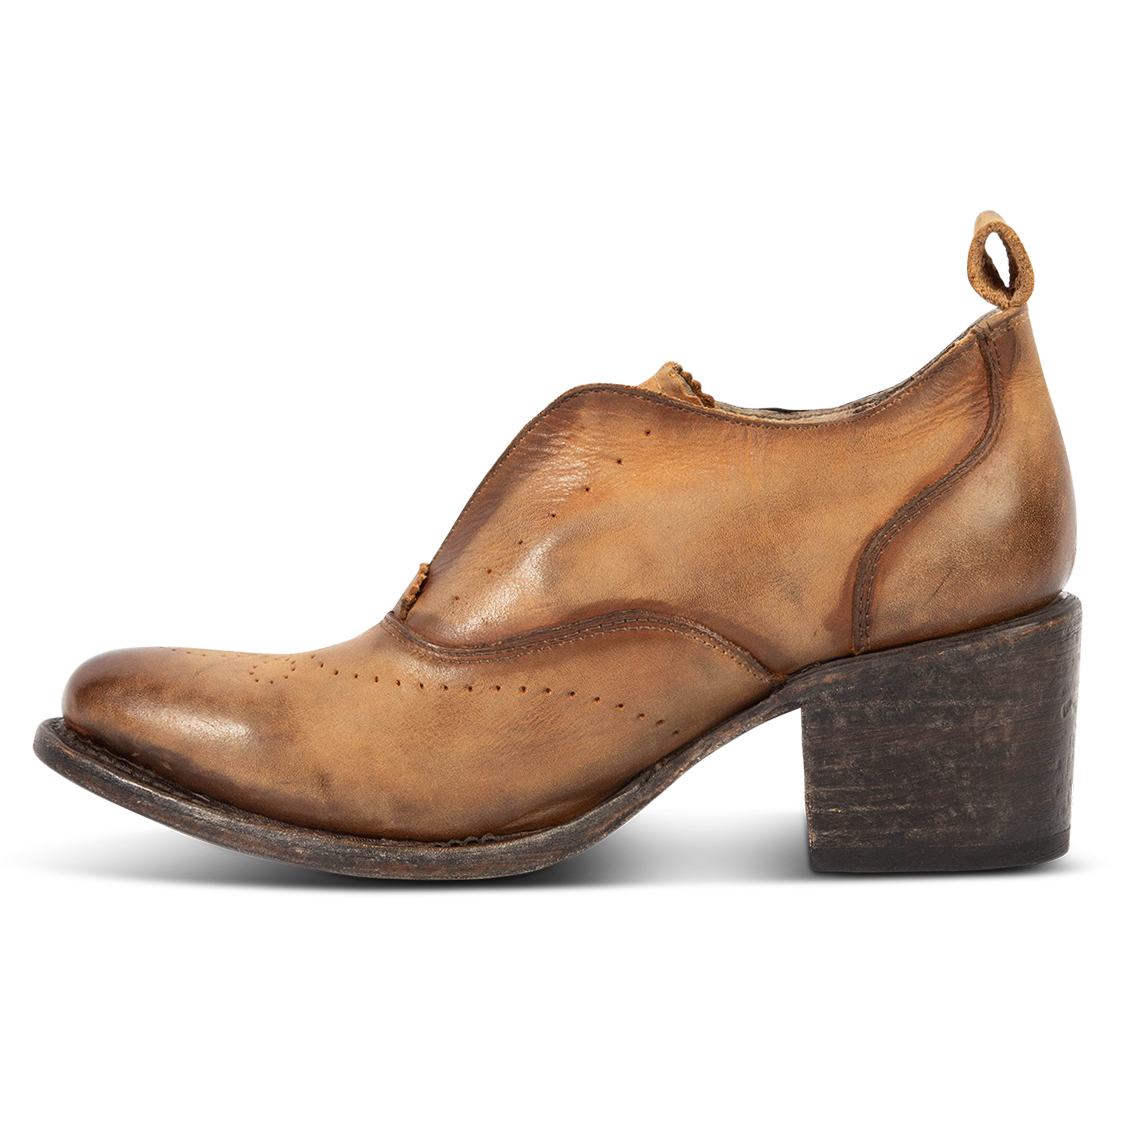 Inside view showing a stacked heel, brogue detailing and single leather pull strap on FREEBIRD women's Sadie Brown leather shoe